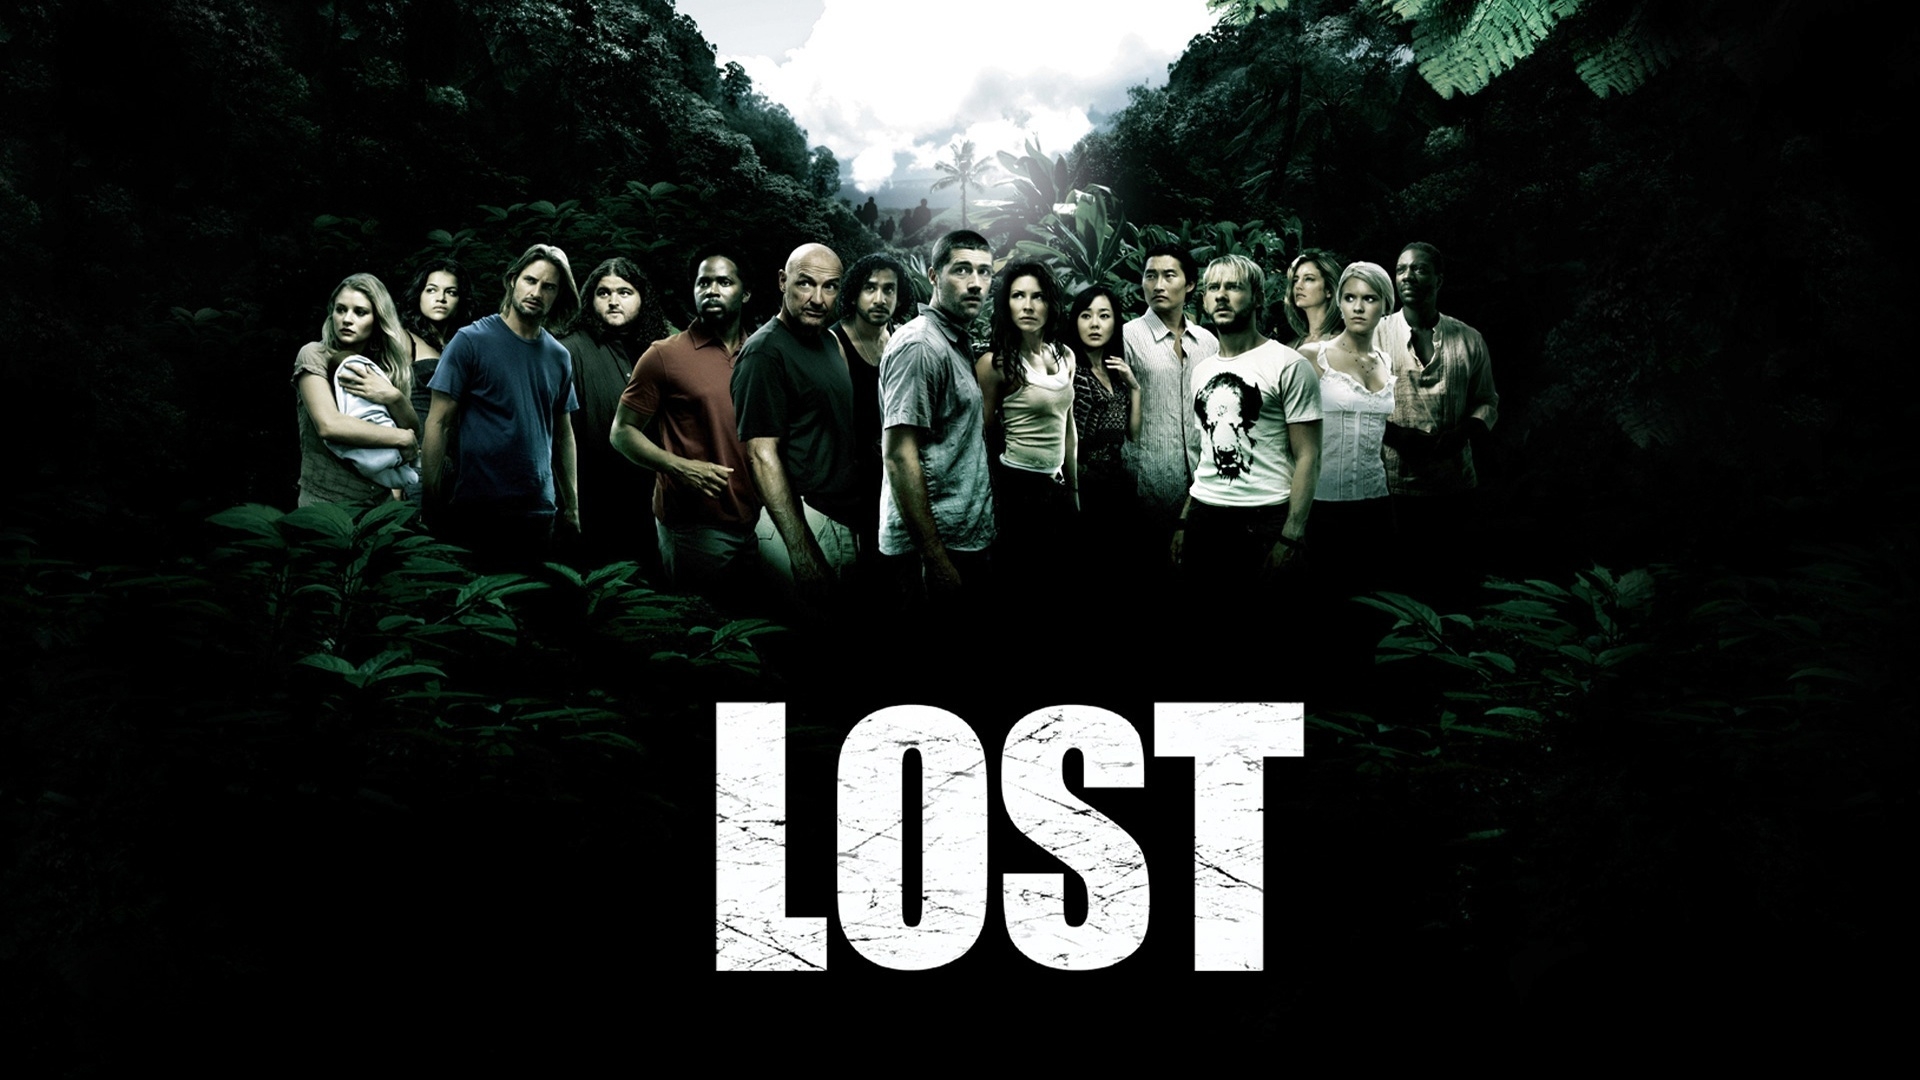 Lost Movie Group for 1920 x 1080 HDTV 1080p resolution